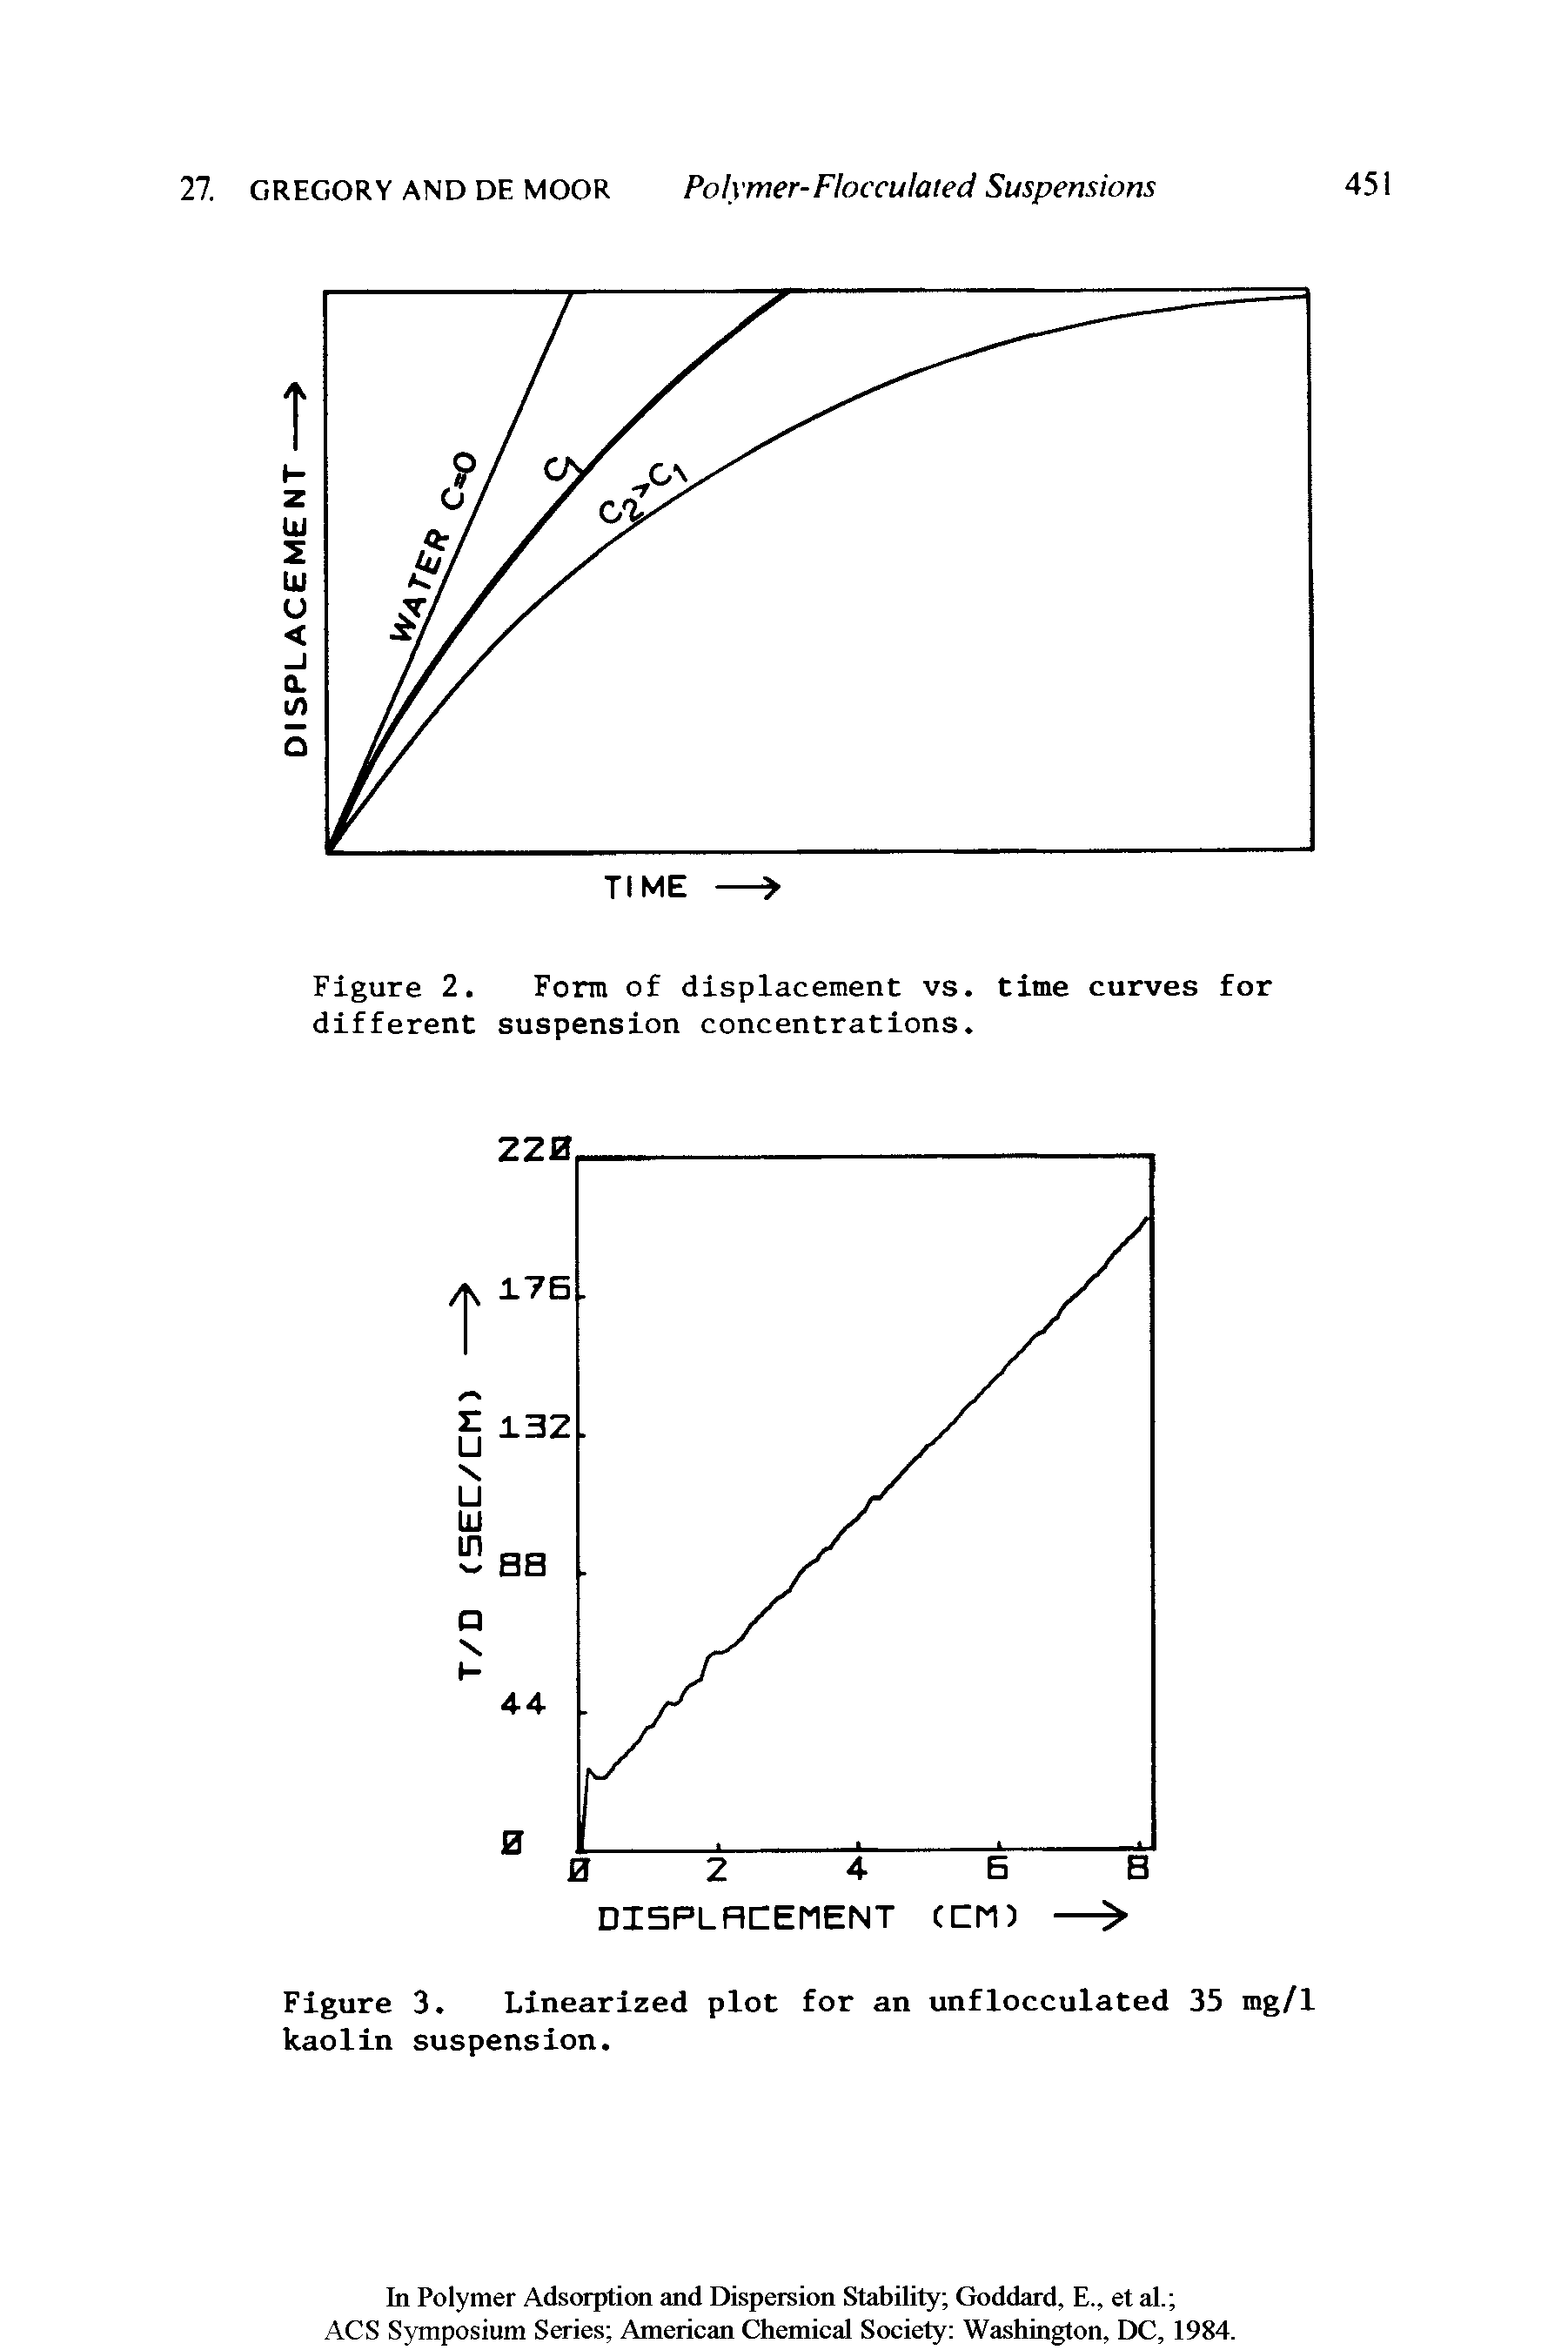 Figure 2. Form of displacement vs. time curves for different suspension concentrations.